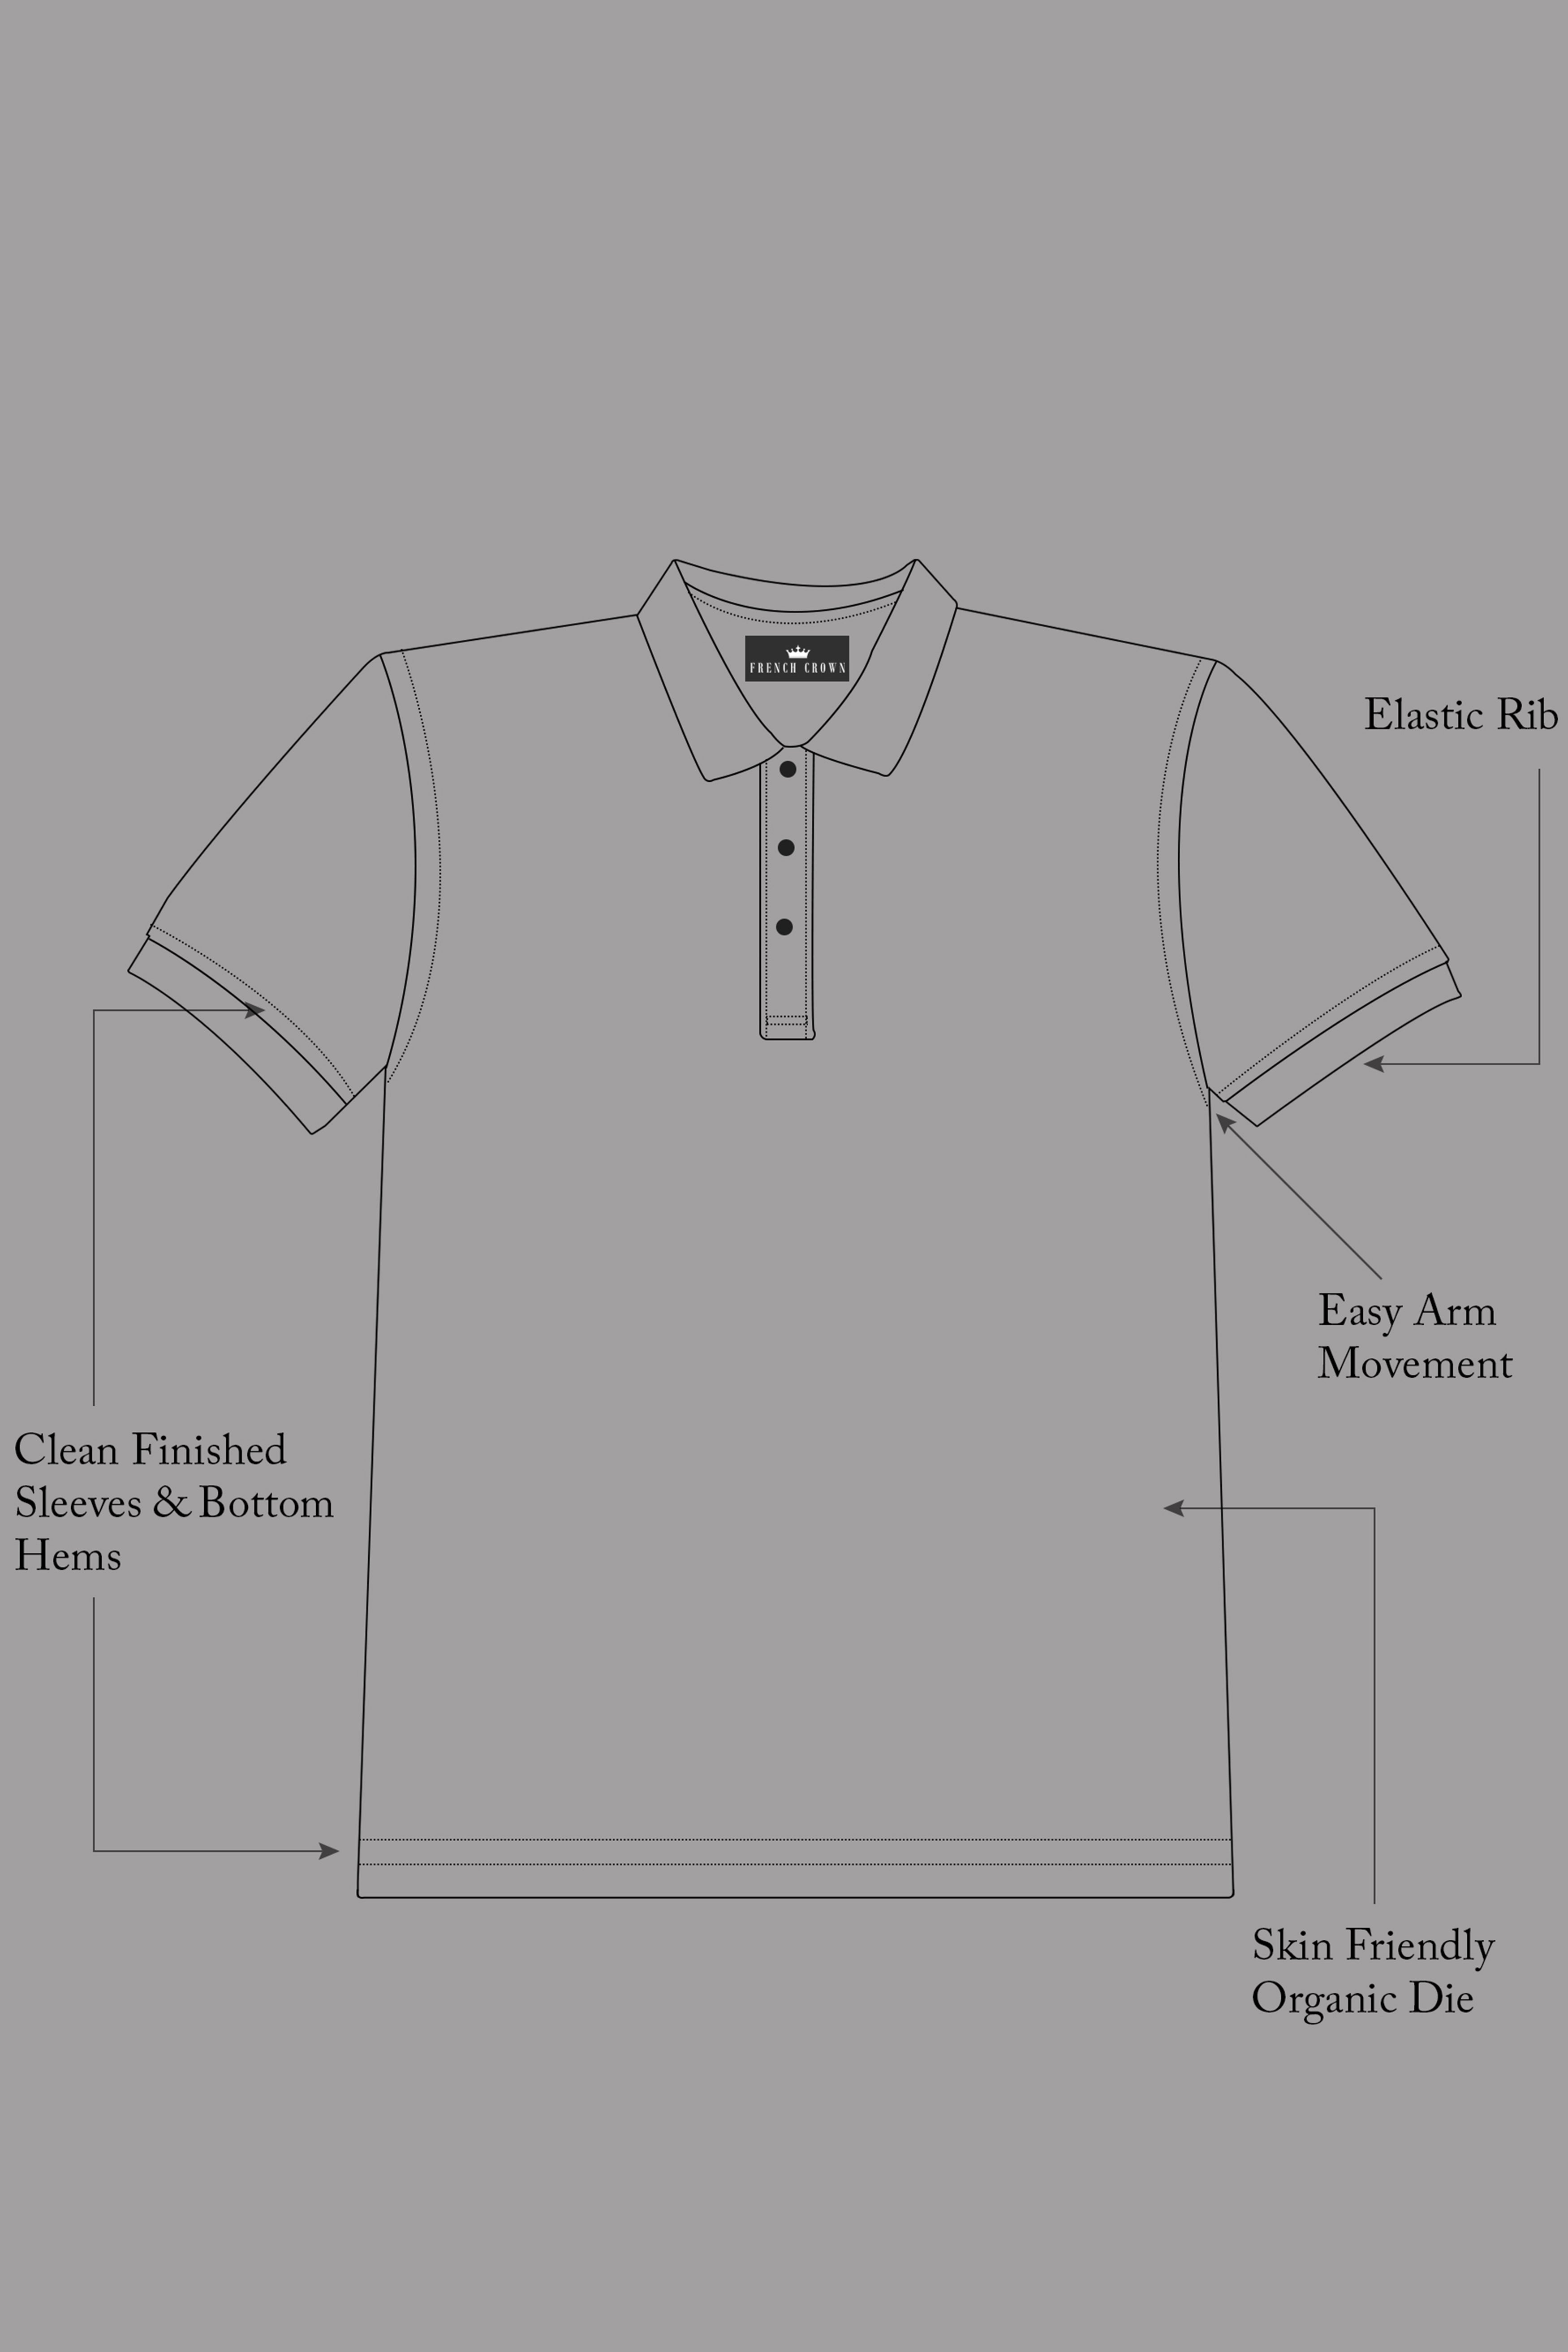 Geyser Gray with White and Black Premium Cotton Flat Knit Polo